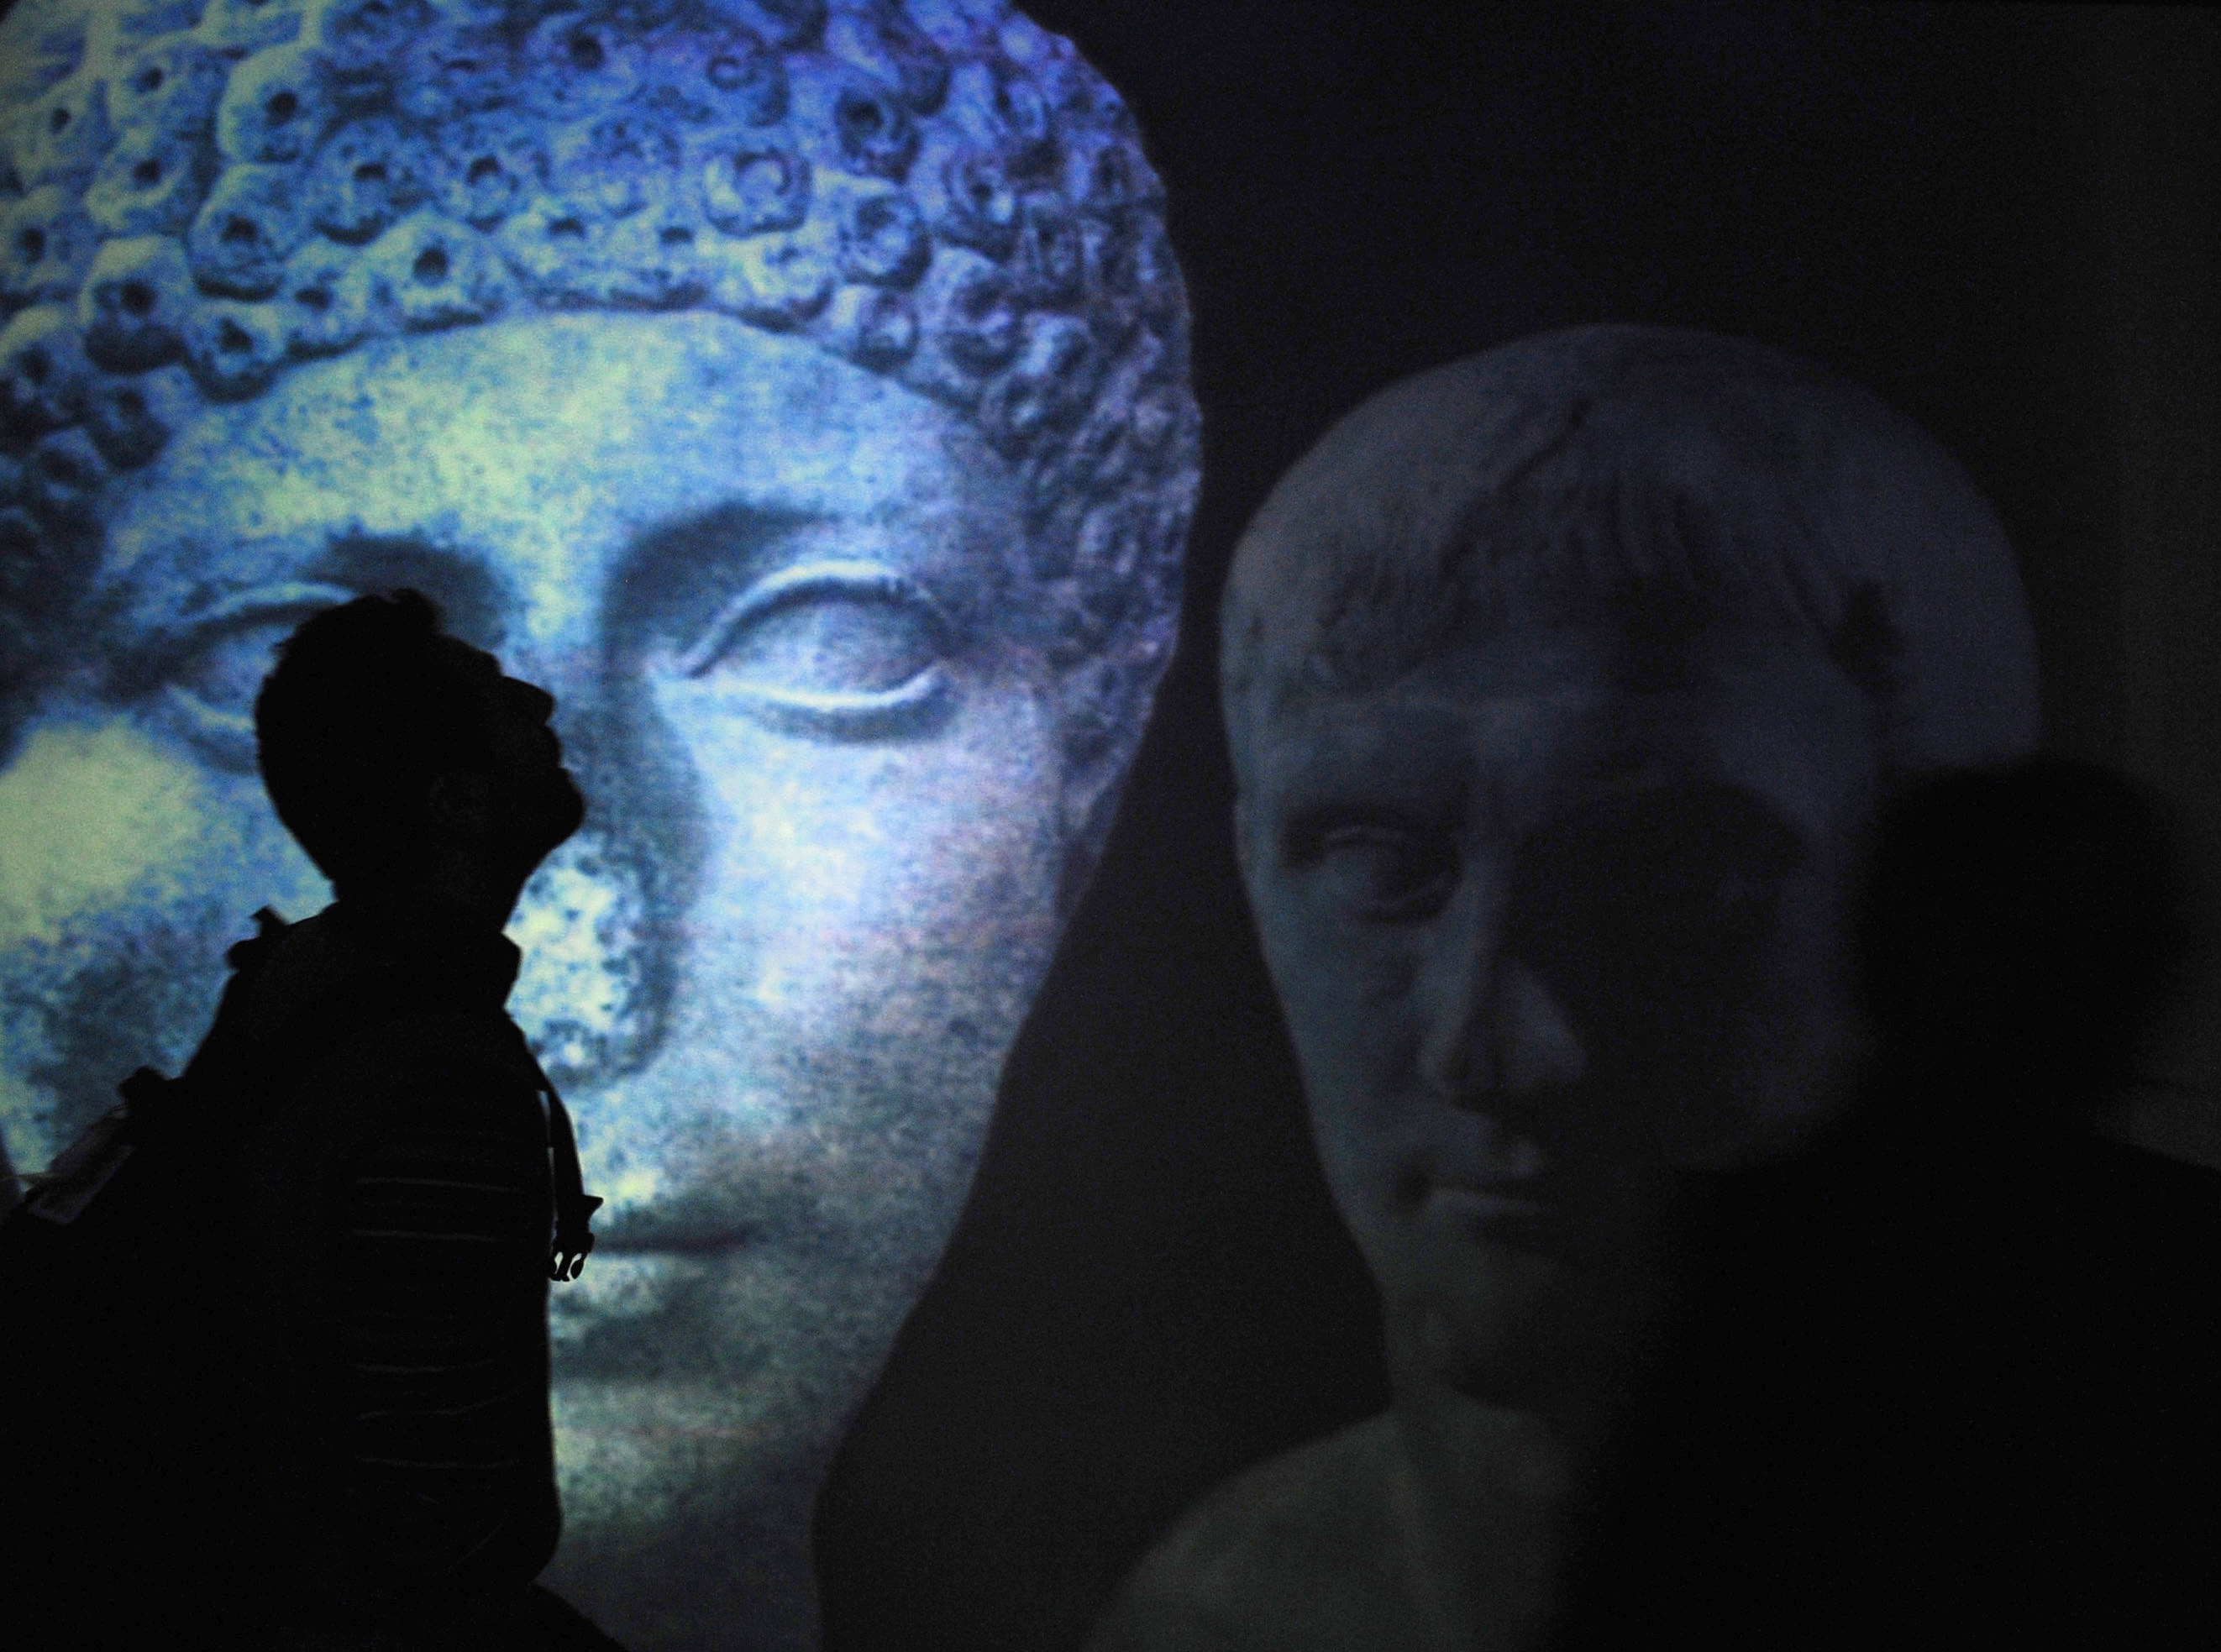 A visitor is silhouetted in front of giant reproductions of statues at the MAV Virtual Archeological Museum in Ercolano, near Naples, southern Italy, on Thursday, Nov. 27, 2008. The museum, installed with infrared cameras to pick up on body movements, opened in July 2008. It hosts multimedia exhibitions on the ancient towns of Pompeii and Ercolano (Herculaneum), in which visitors can interact with screens to remove ashes and unveil a mosaic or remove steam and unveil a woman being bathed, as the daily life of the time has been recreated in 3D installations. (AP Photo/Salvatore Laporta)